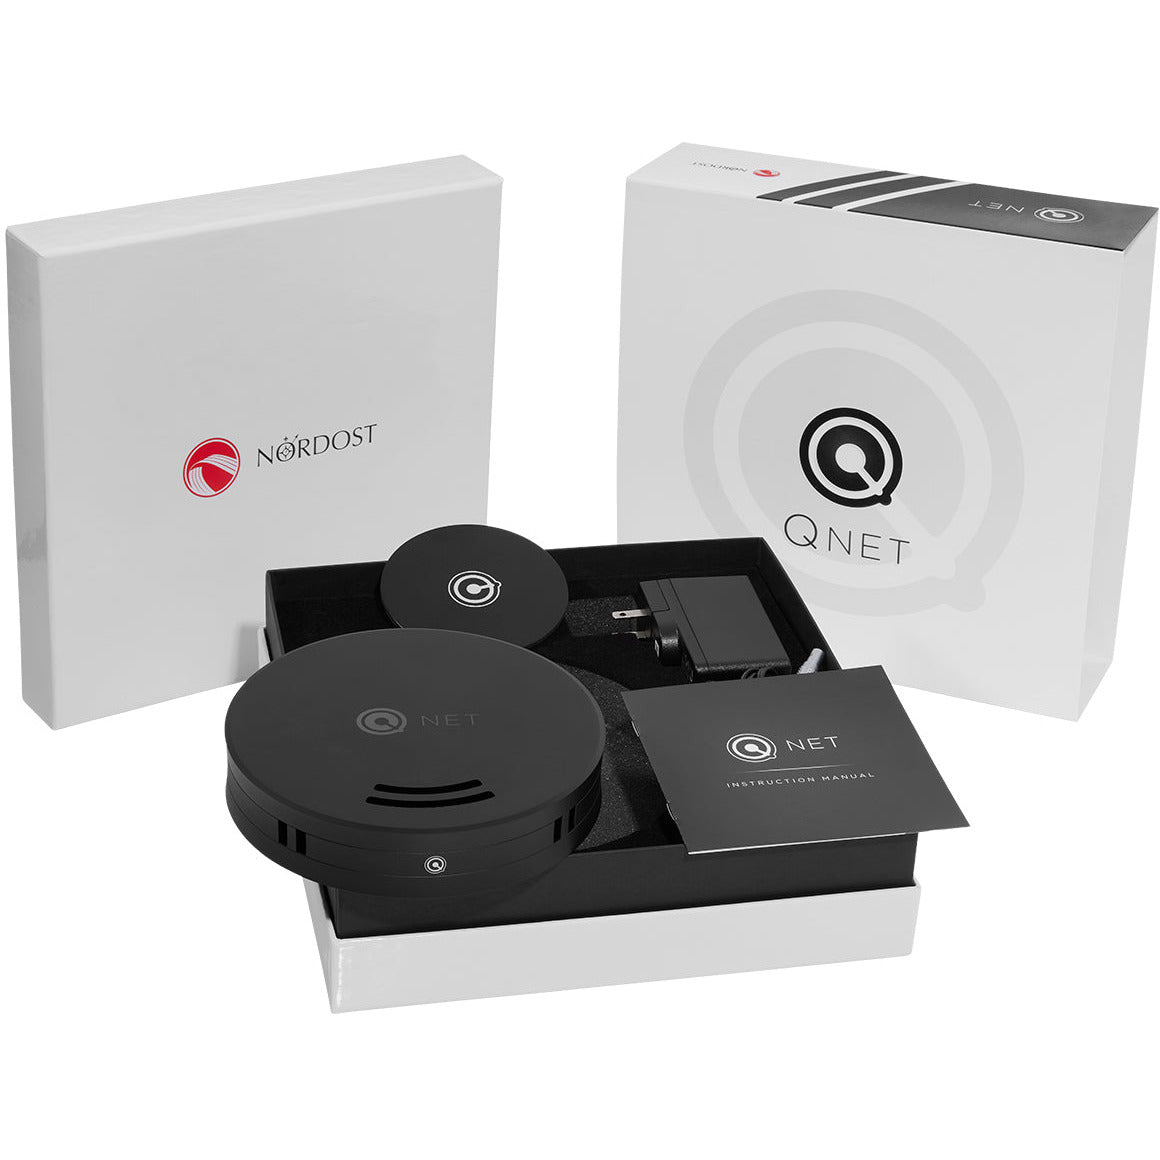 Nordost QNET Network Switch